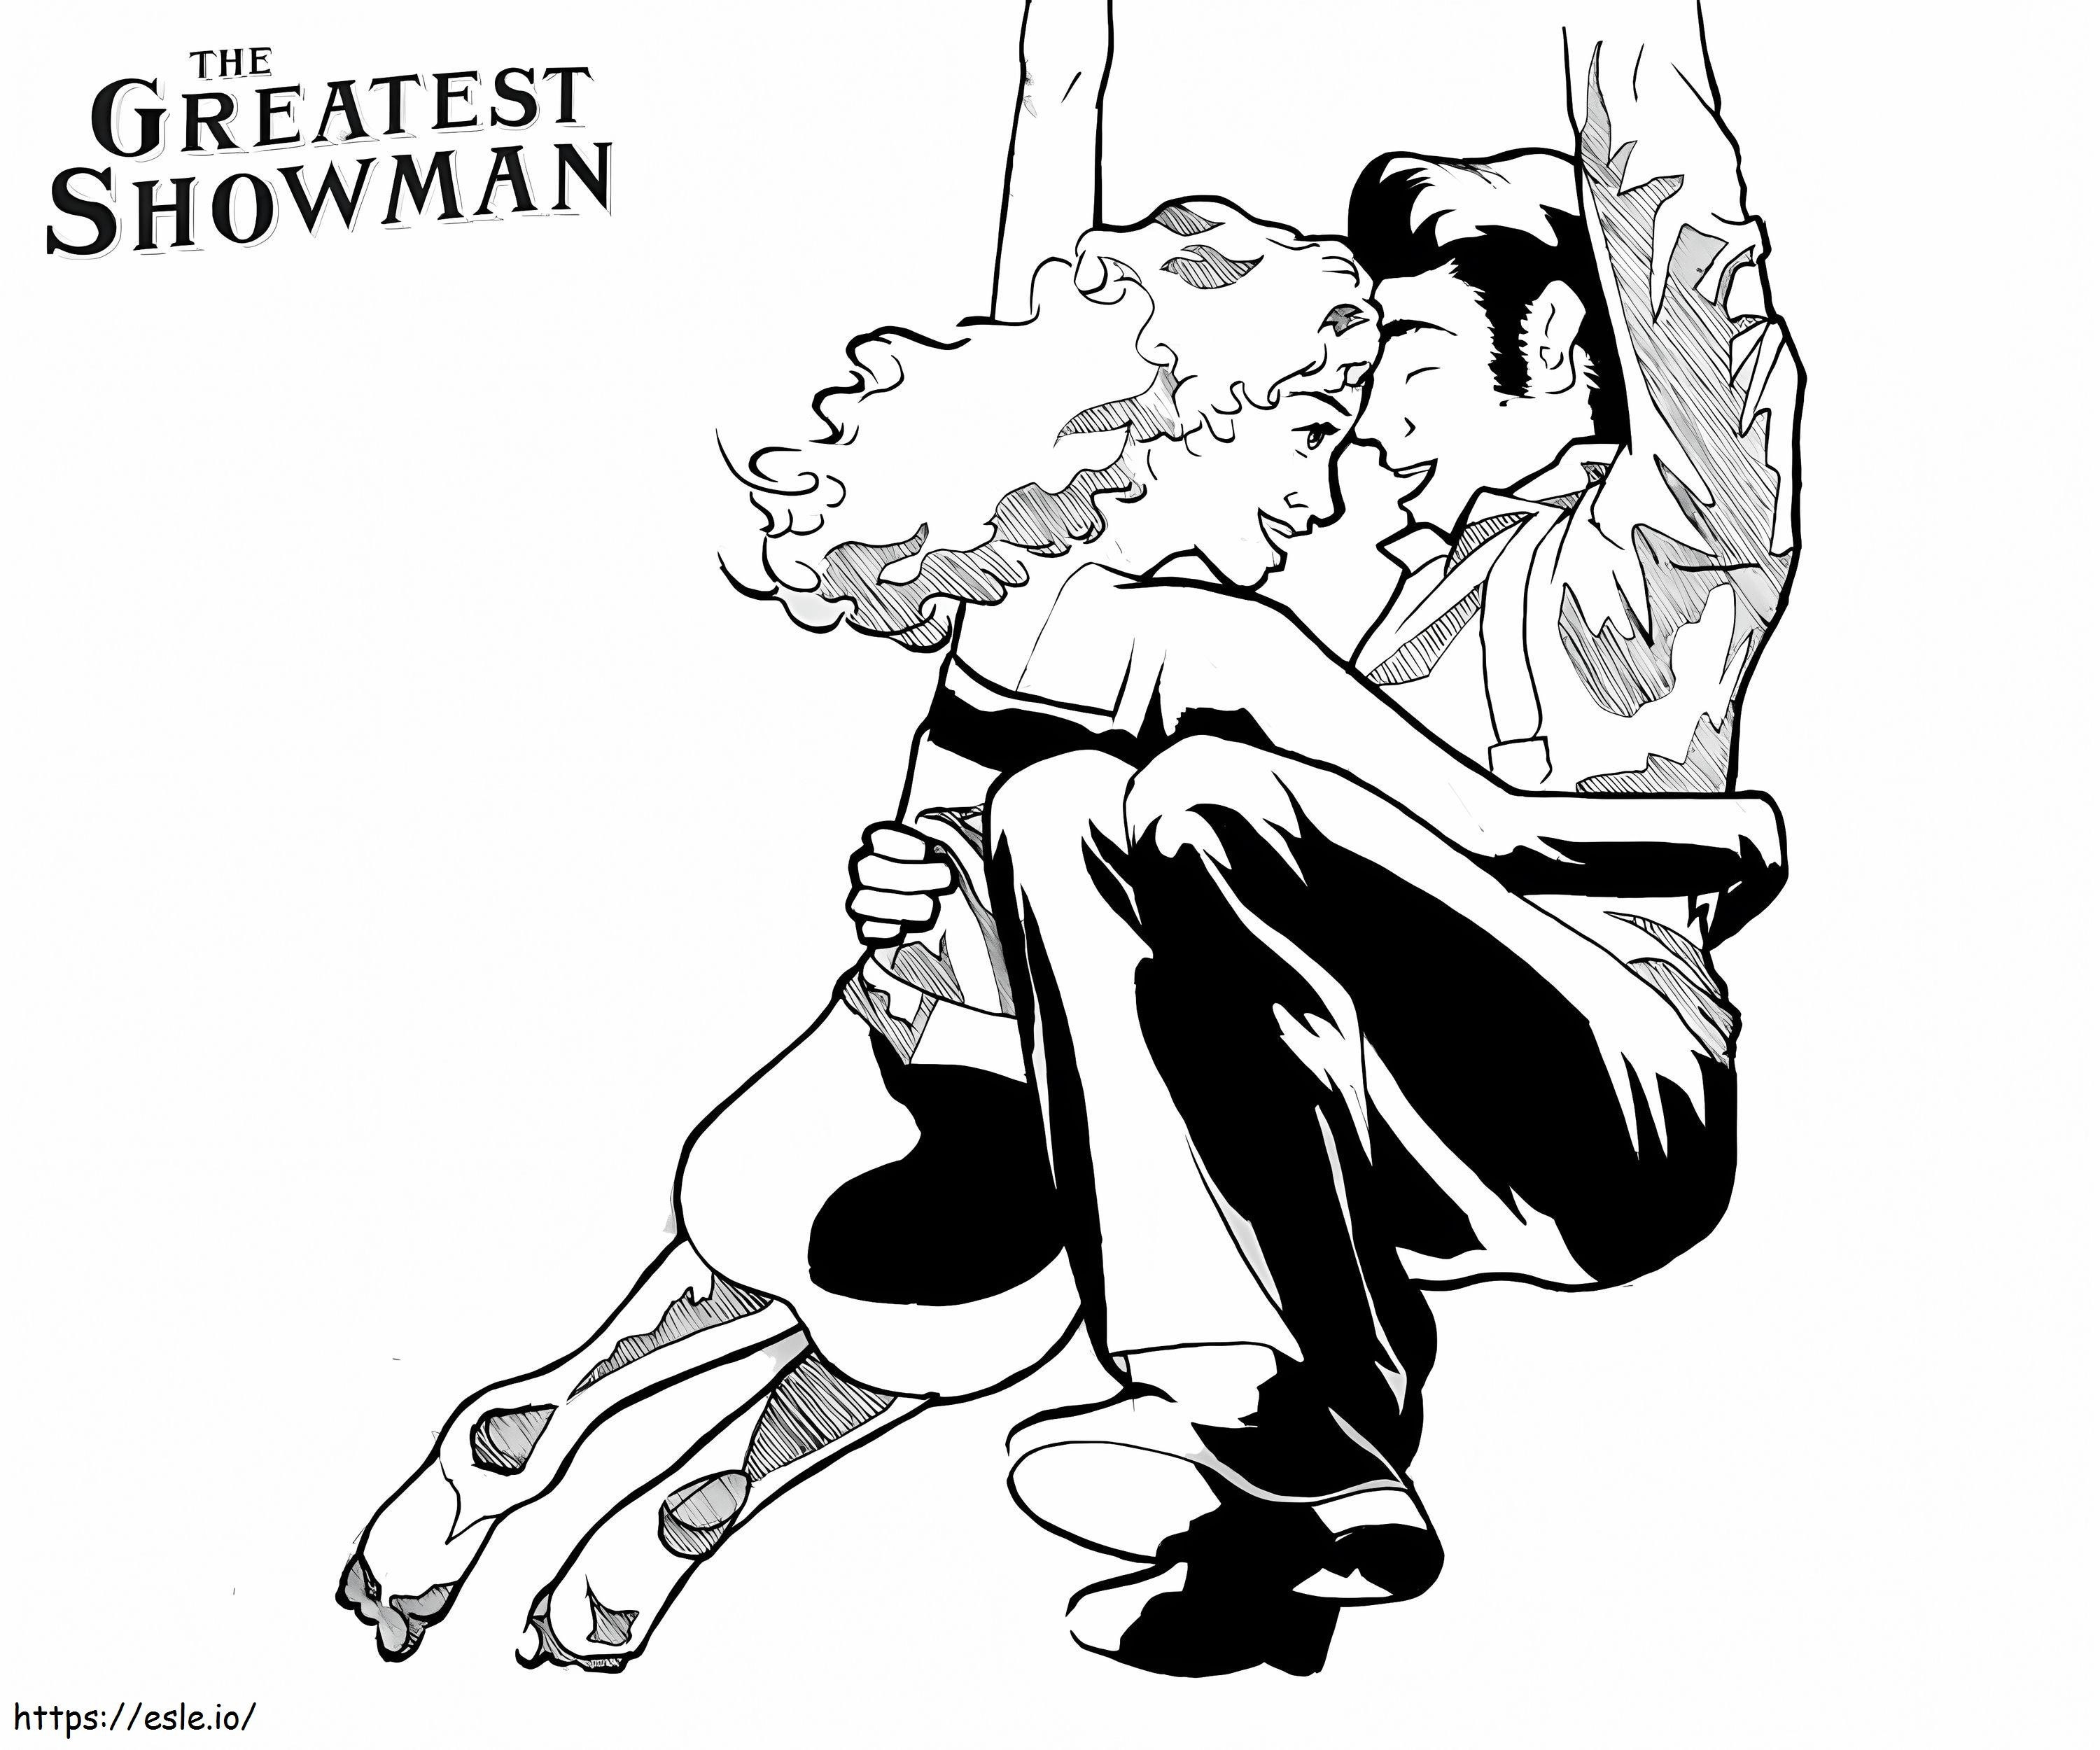 The Greatest Showman 3 coloring page